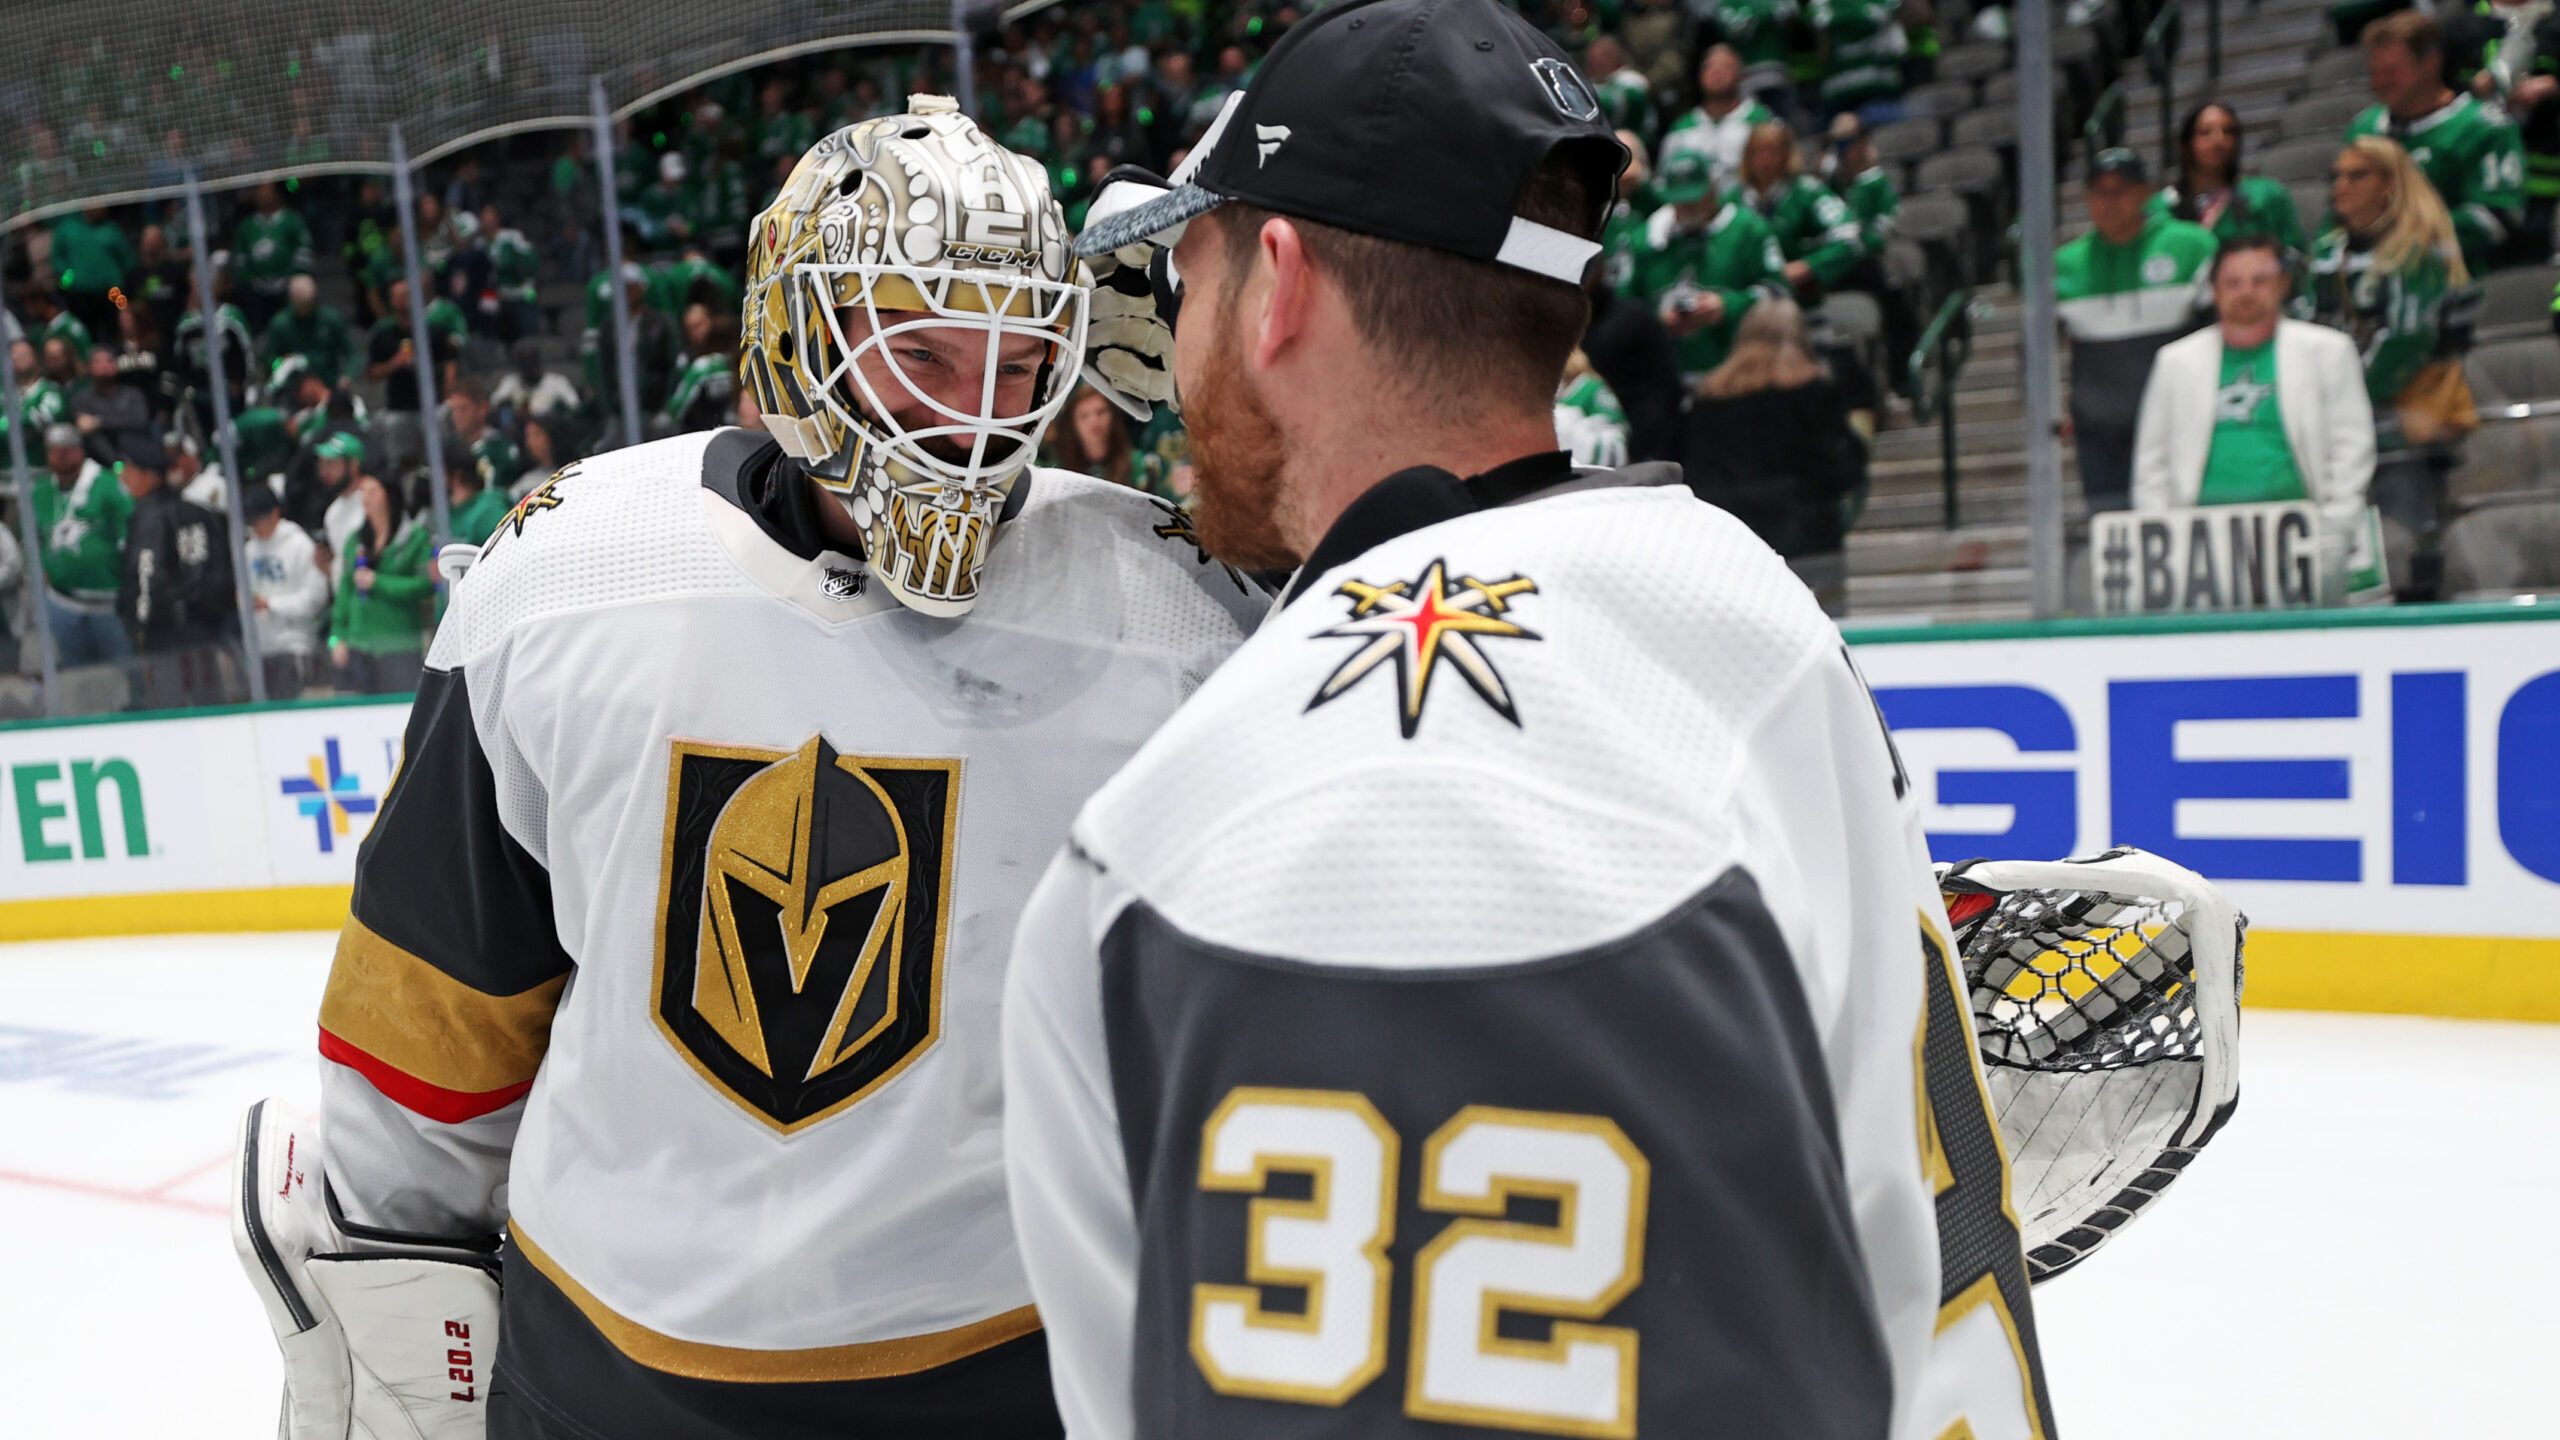 Vegas-Florida Stanley Cup Final Pits Top Team In West Against Upstart In East